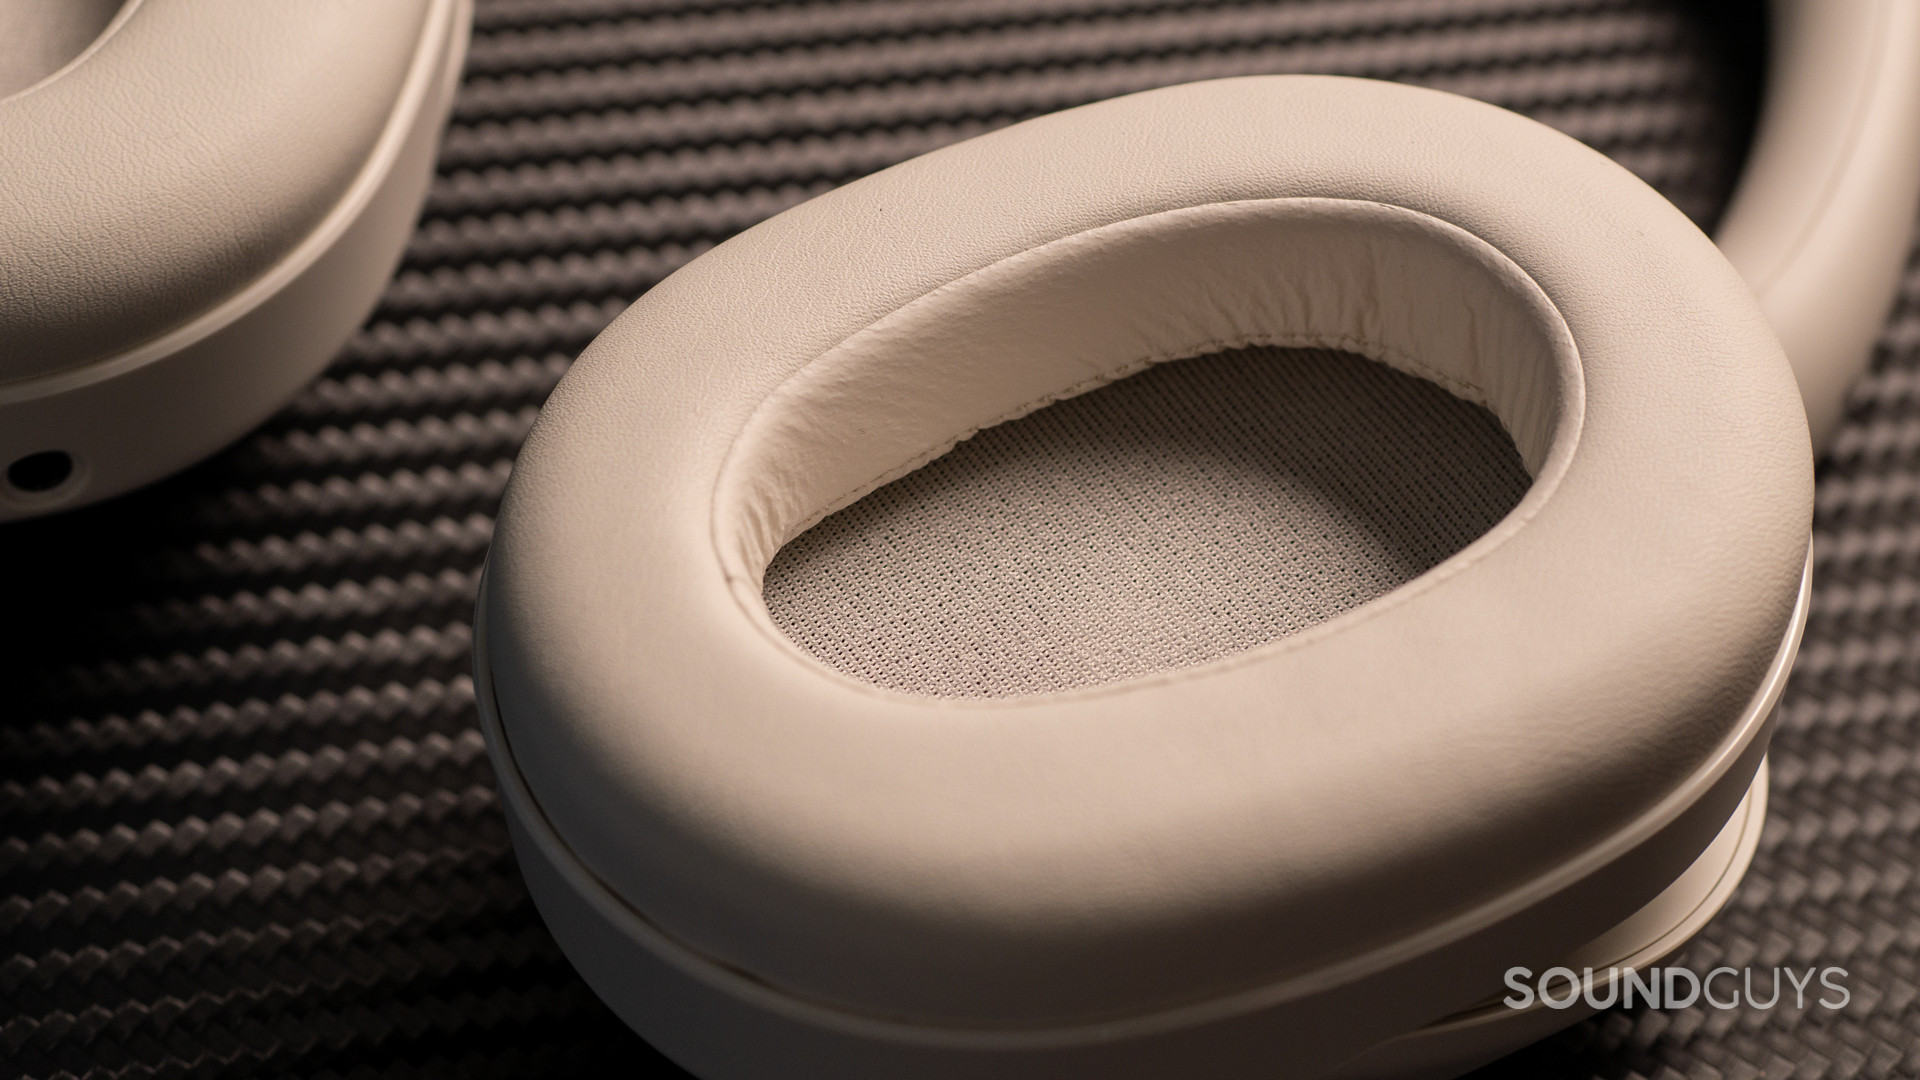 A close-up photo of the Sony ULT WEAR's enlarged ear pads.